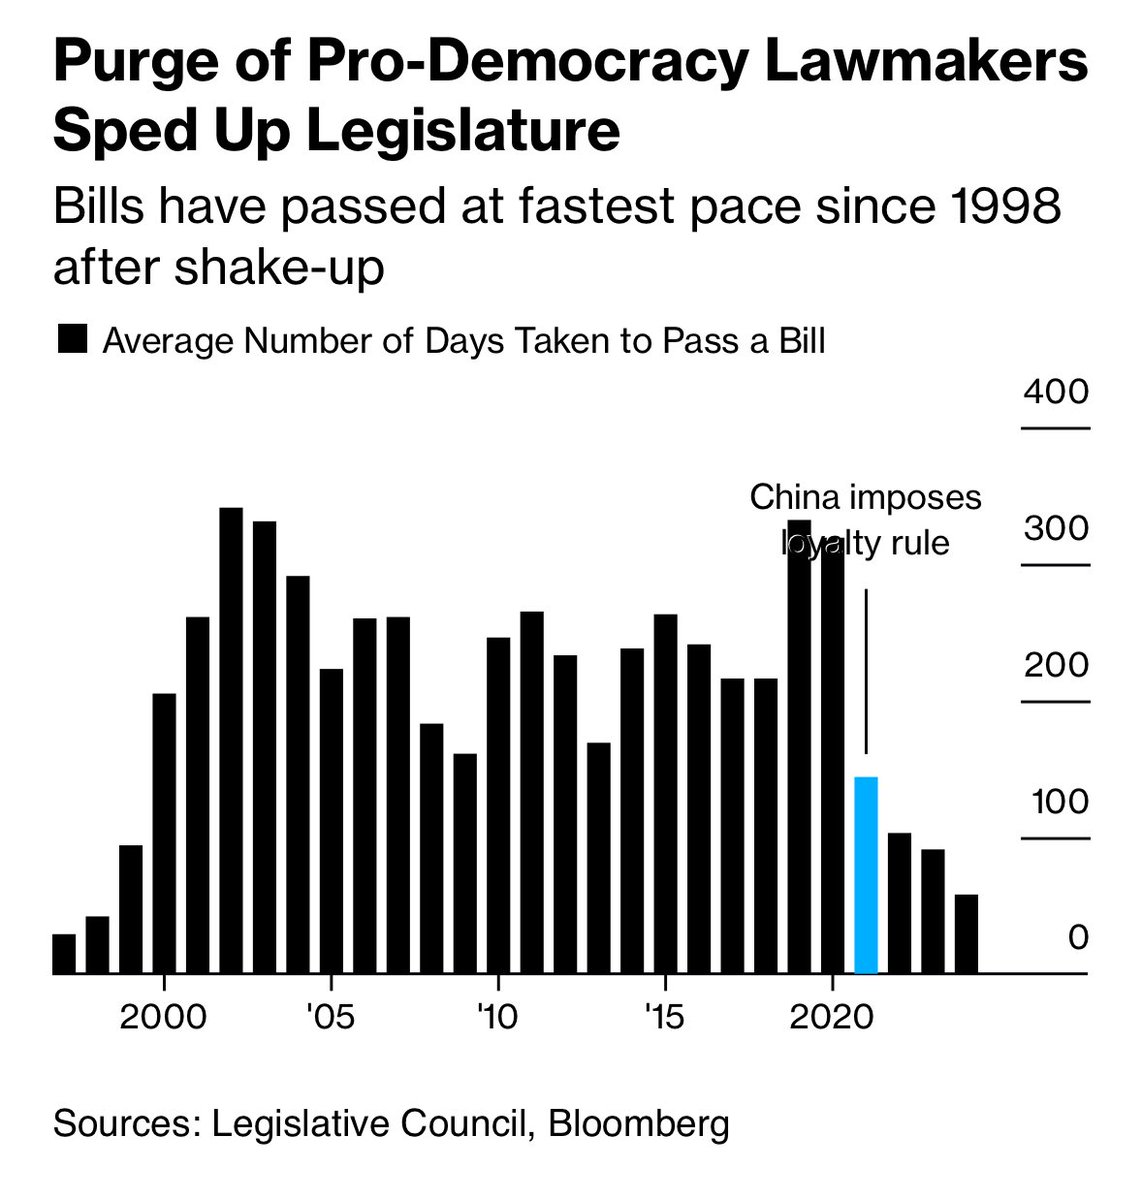 We looked at 1200+ draft laws submitted to Hong Kong’s legislature since 1997. The new security law is literally the fastest bill passed from submission to voting. Chart shows how much faster the LegCo passes bills after China forced out opposition in 2021 bloomberg.com/news/articles/…